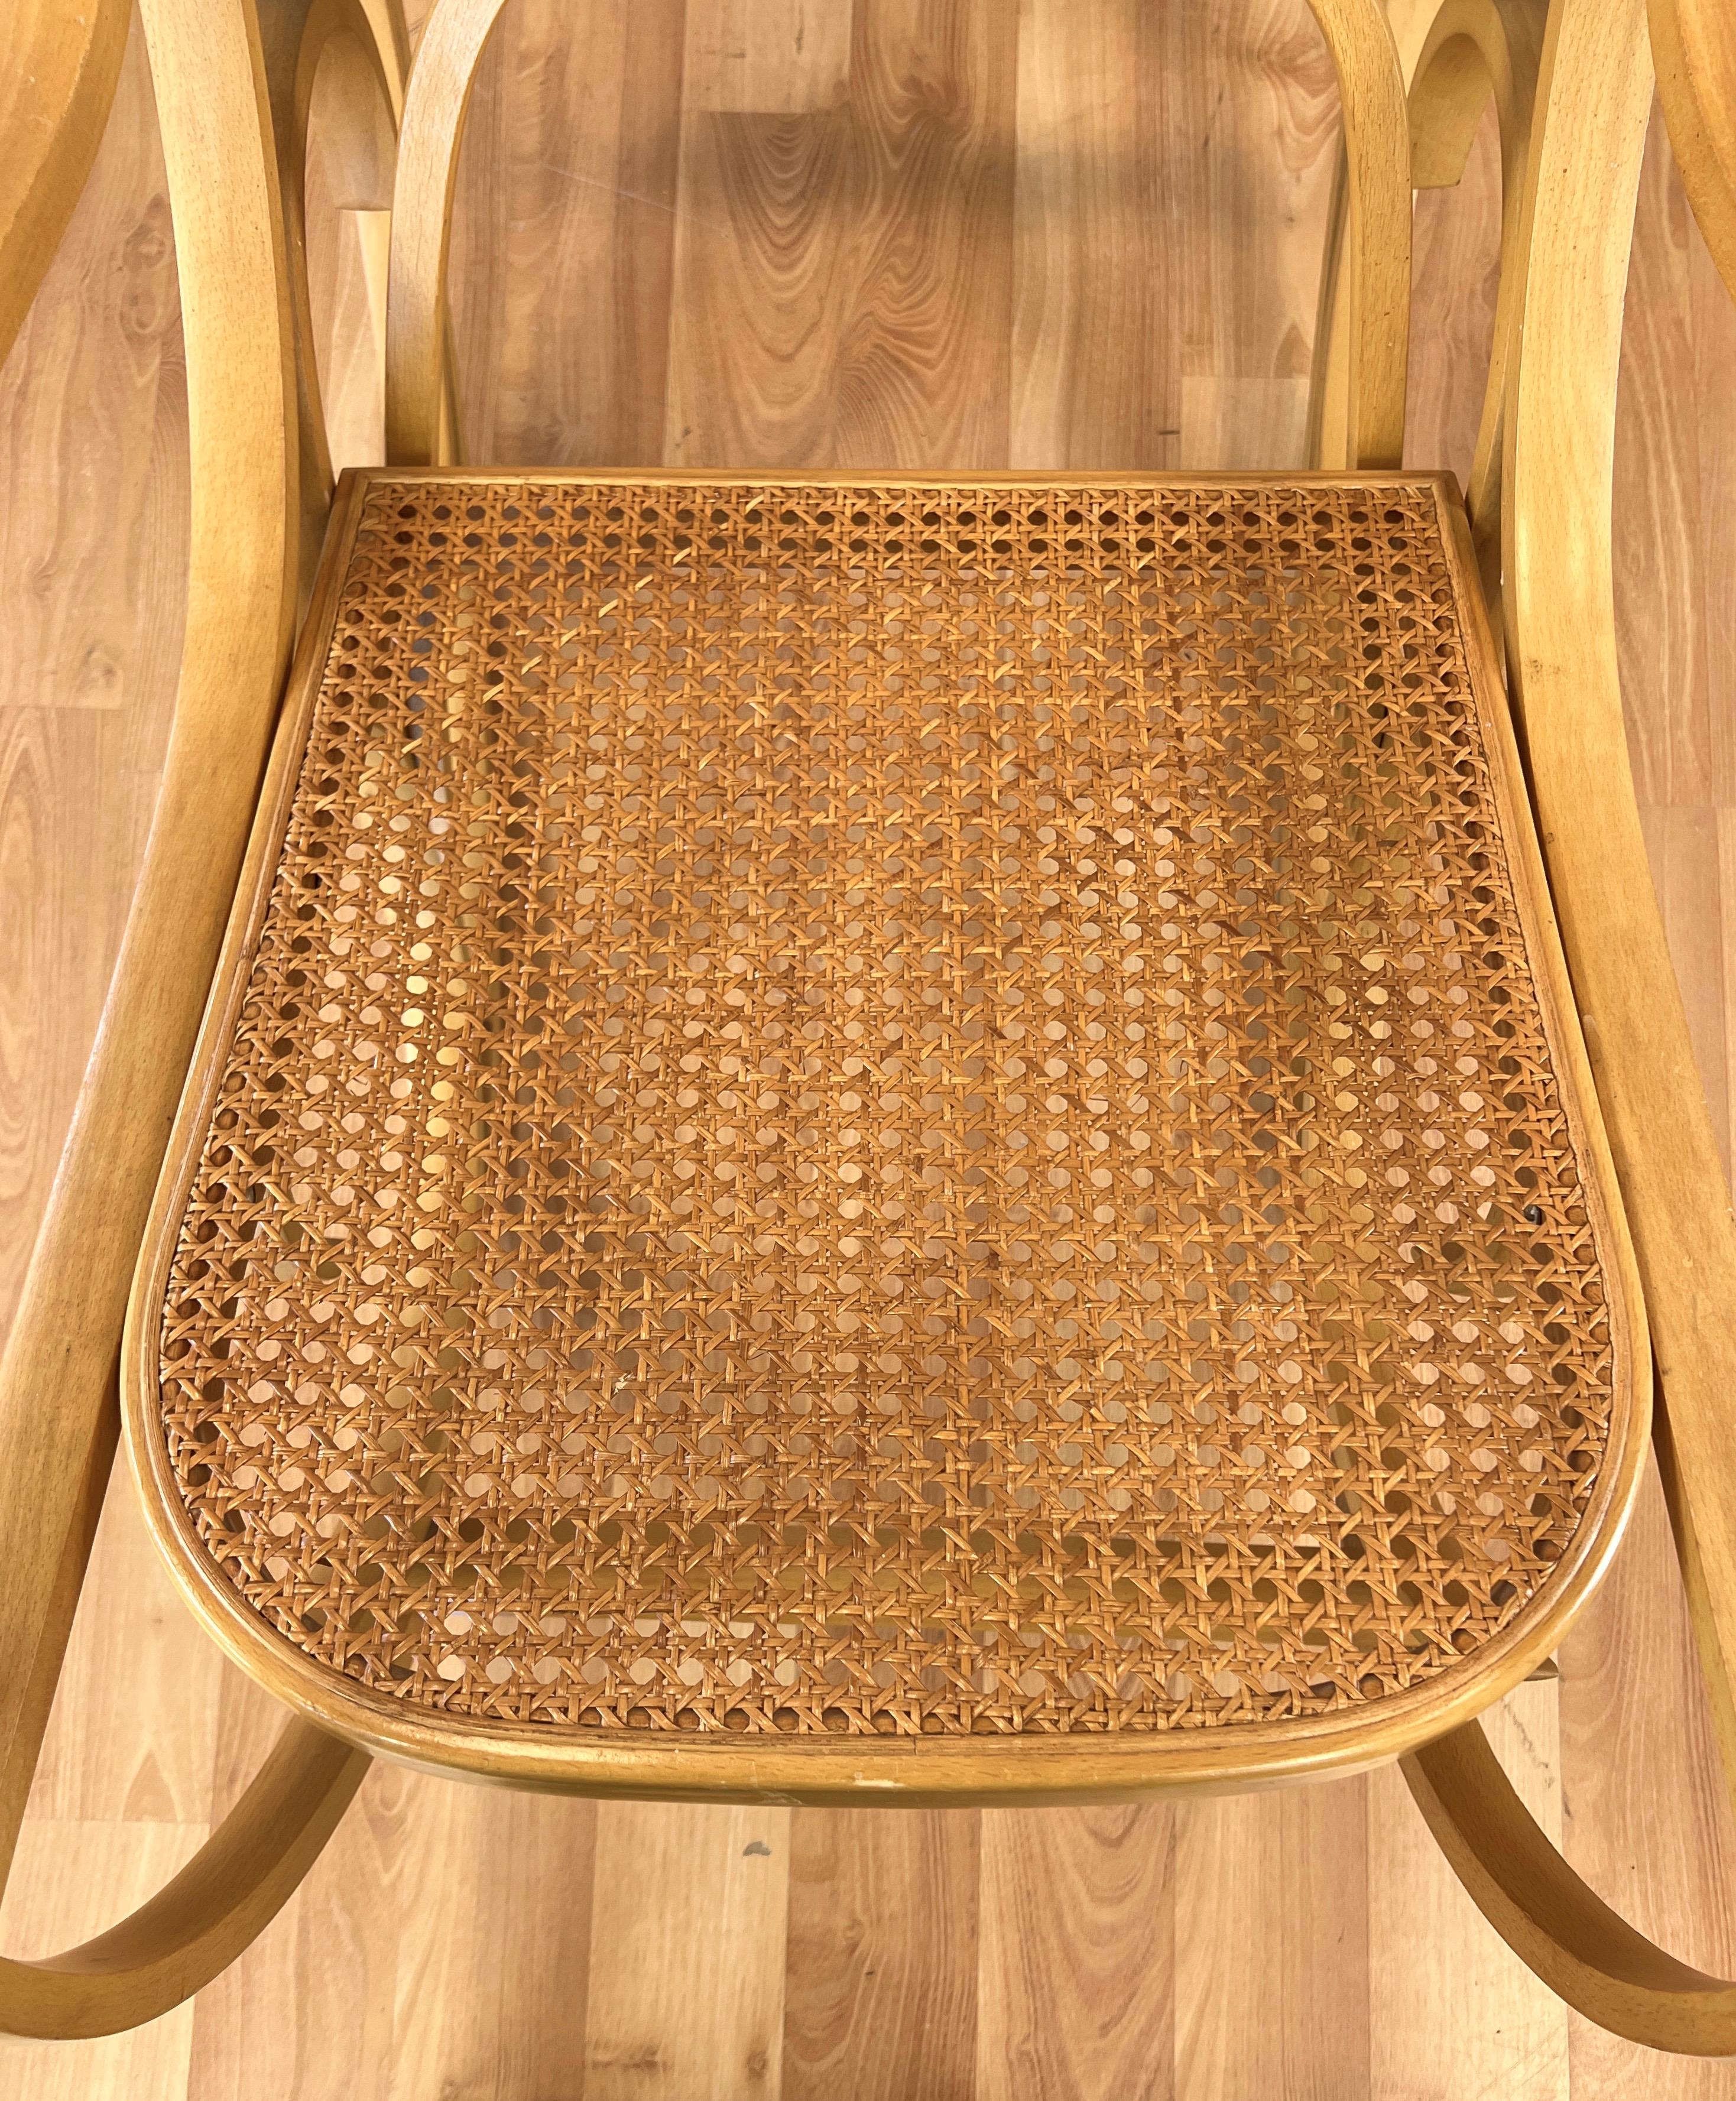 Luigi Crassevig Italian Bentwood Rocking Chair with Woven Cane Seat, 1970s For Sale 5